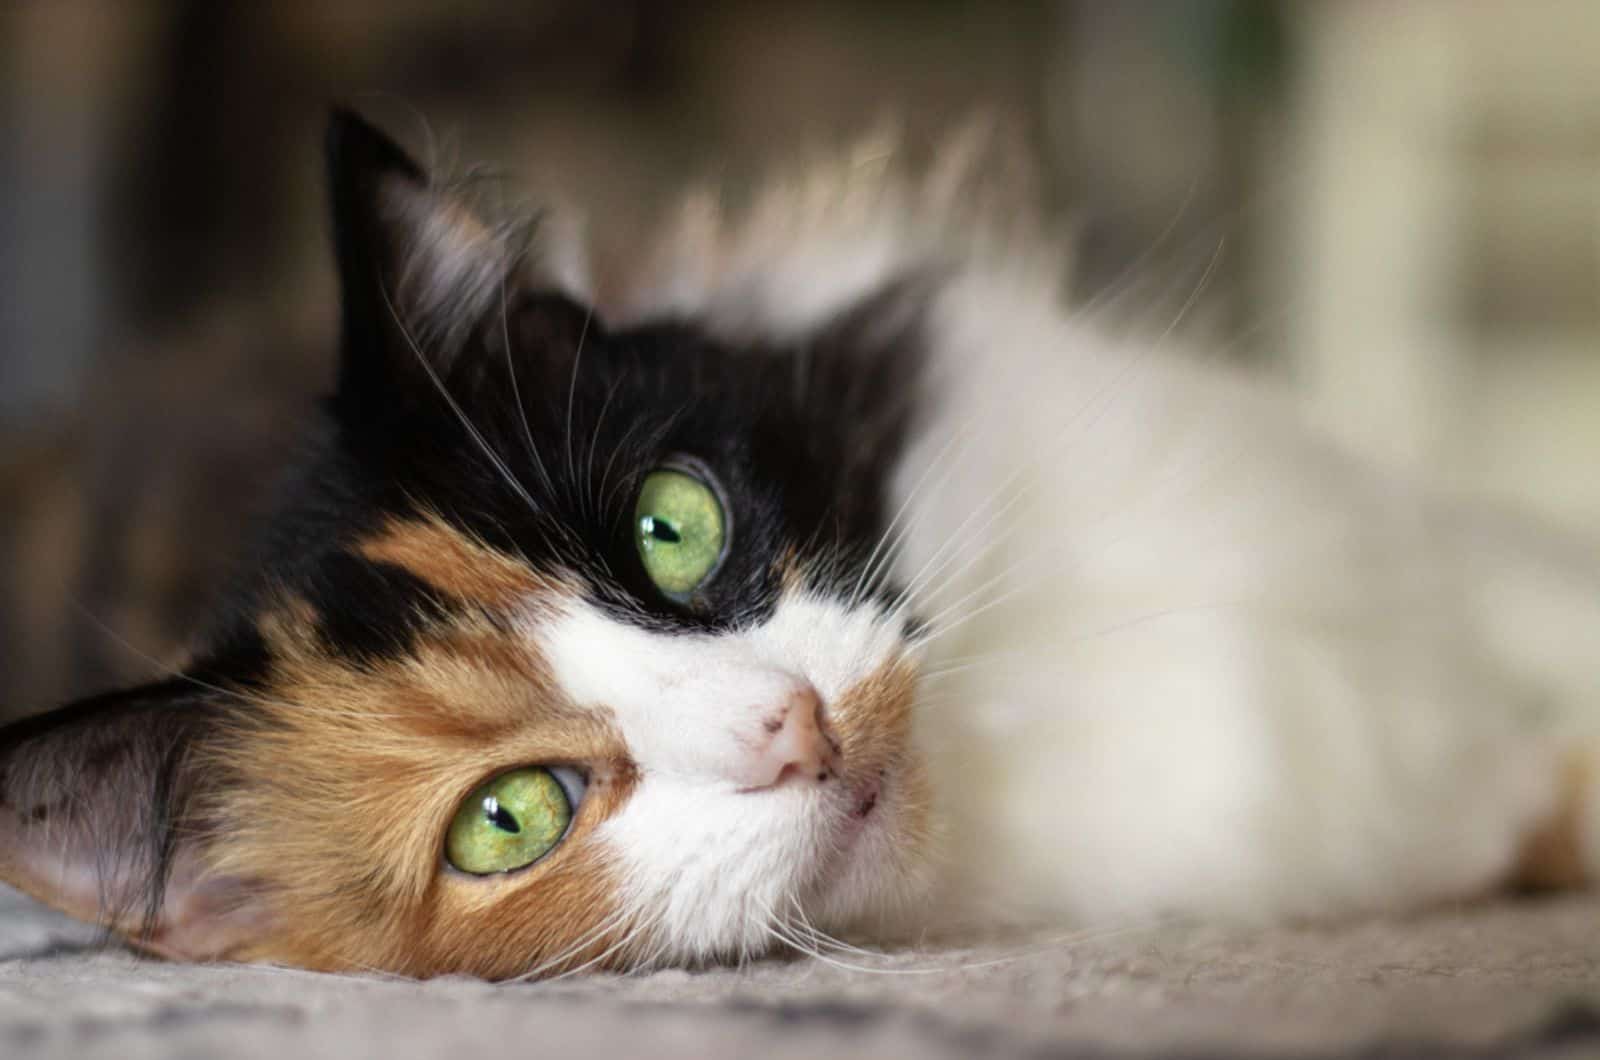  haired Calico cat with bright green eyes